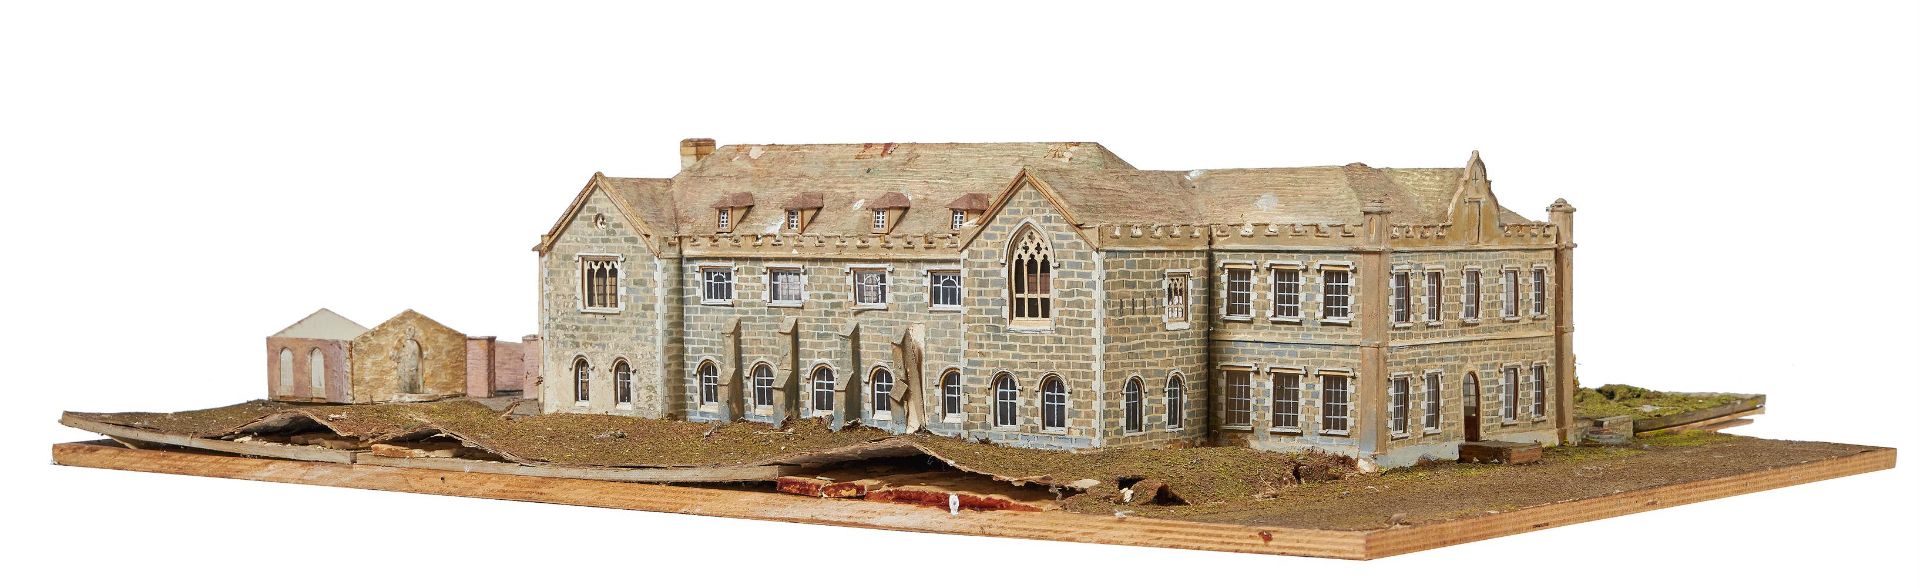 AN ARCHITECTURAL MODEL OF FLAXLEY ABBEY, BY OLIVER MESSEL - Image 10 of 34